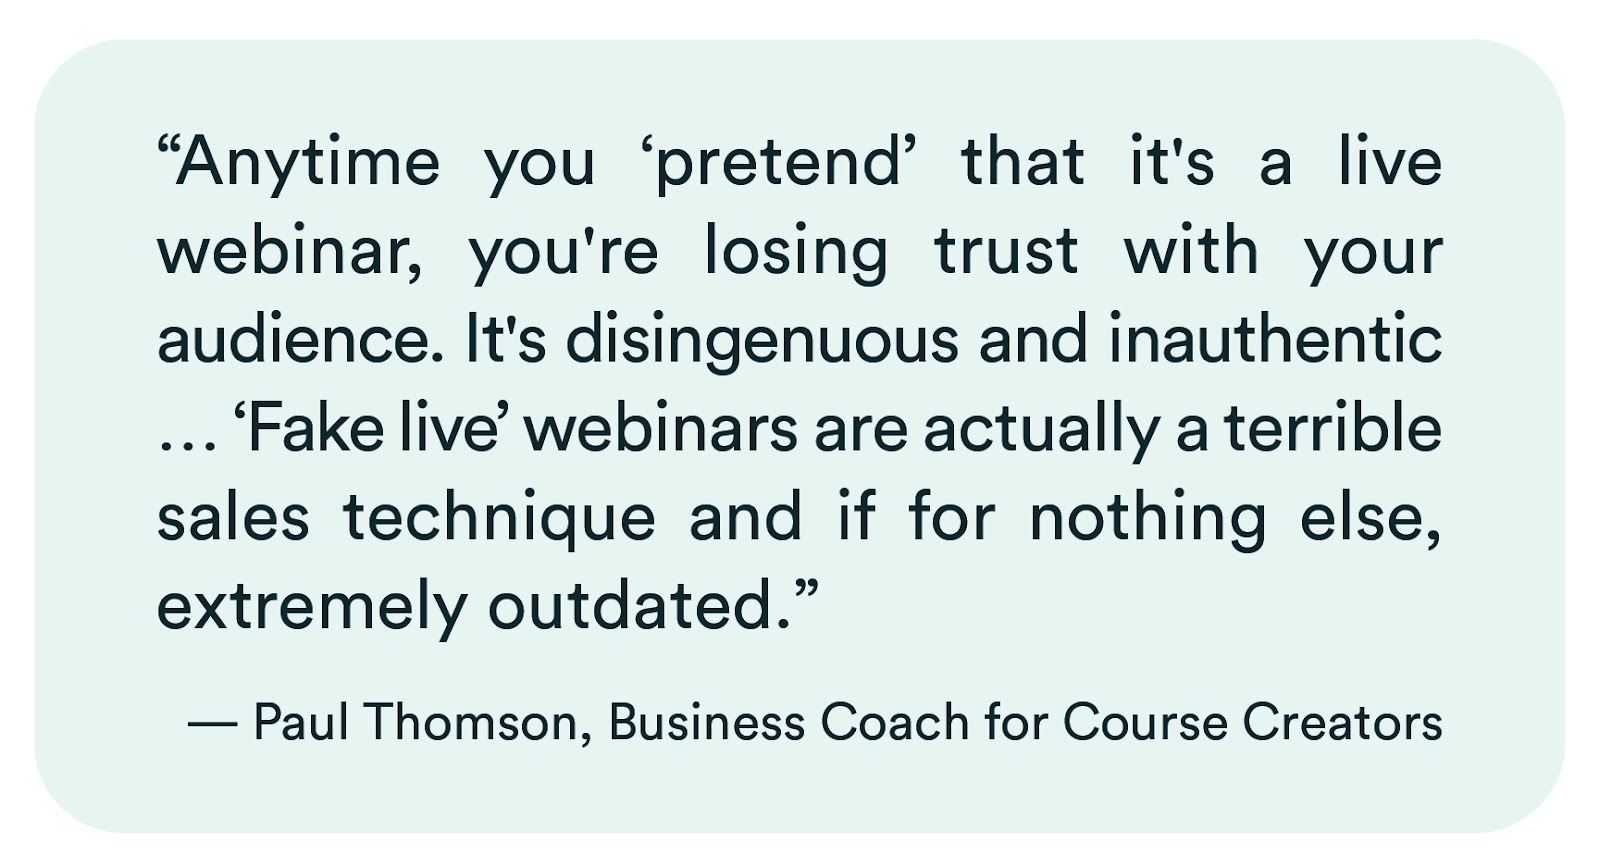 Quote from course creator coach, Paul Thomson